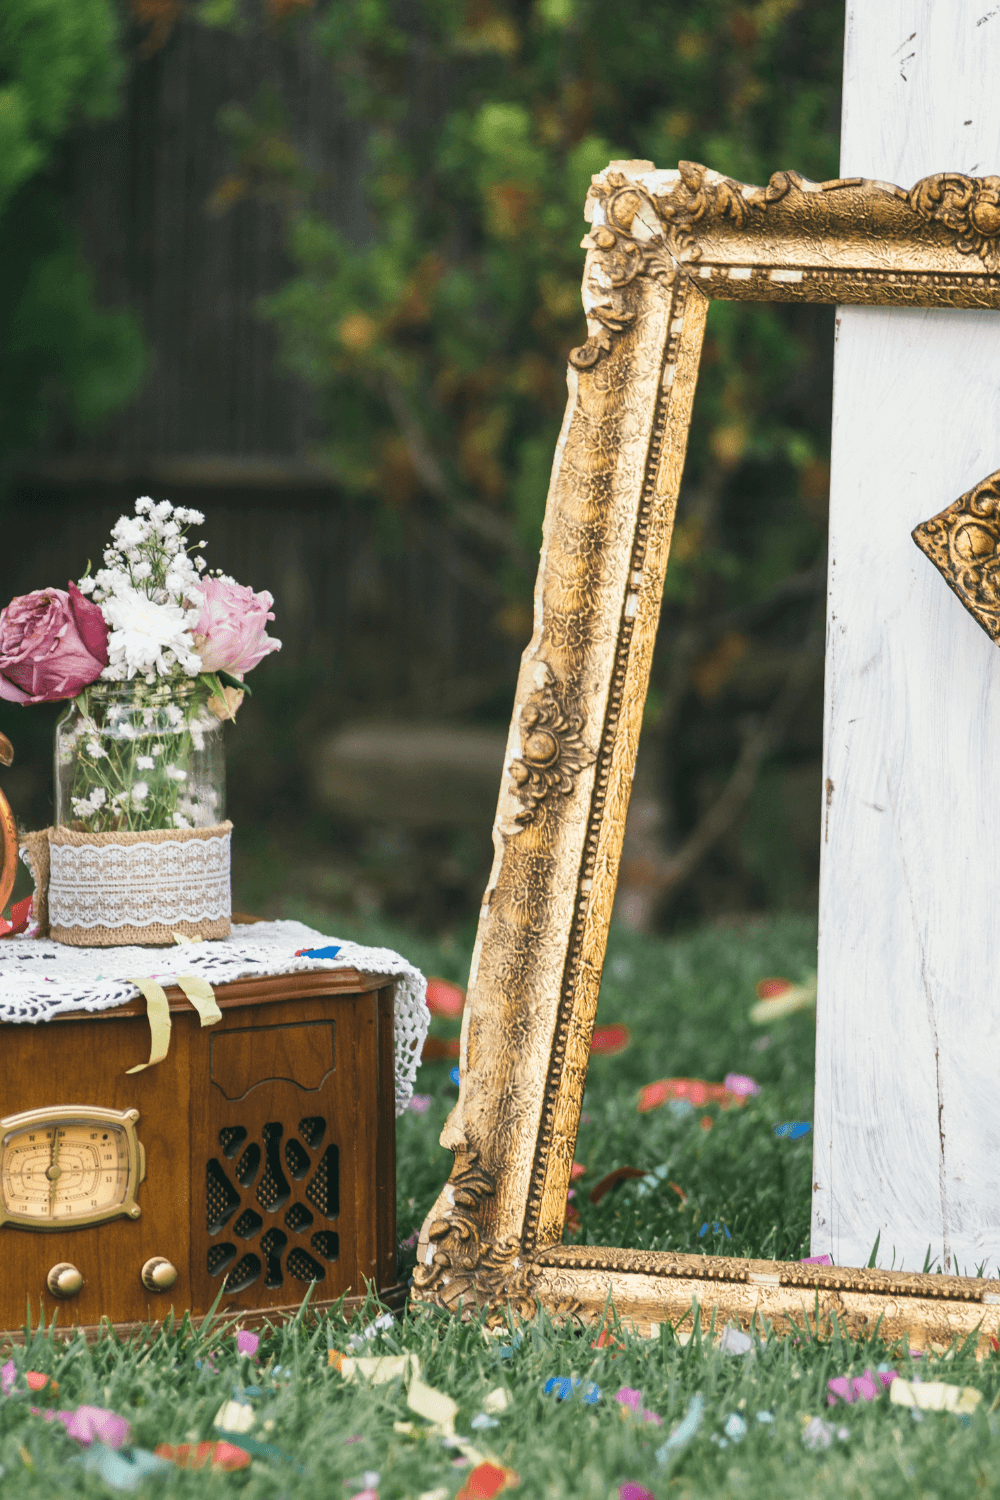 34 DIY Wedding Decorations That Will Make Your Special Day Unique